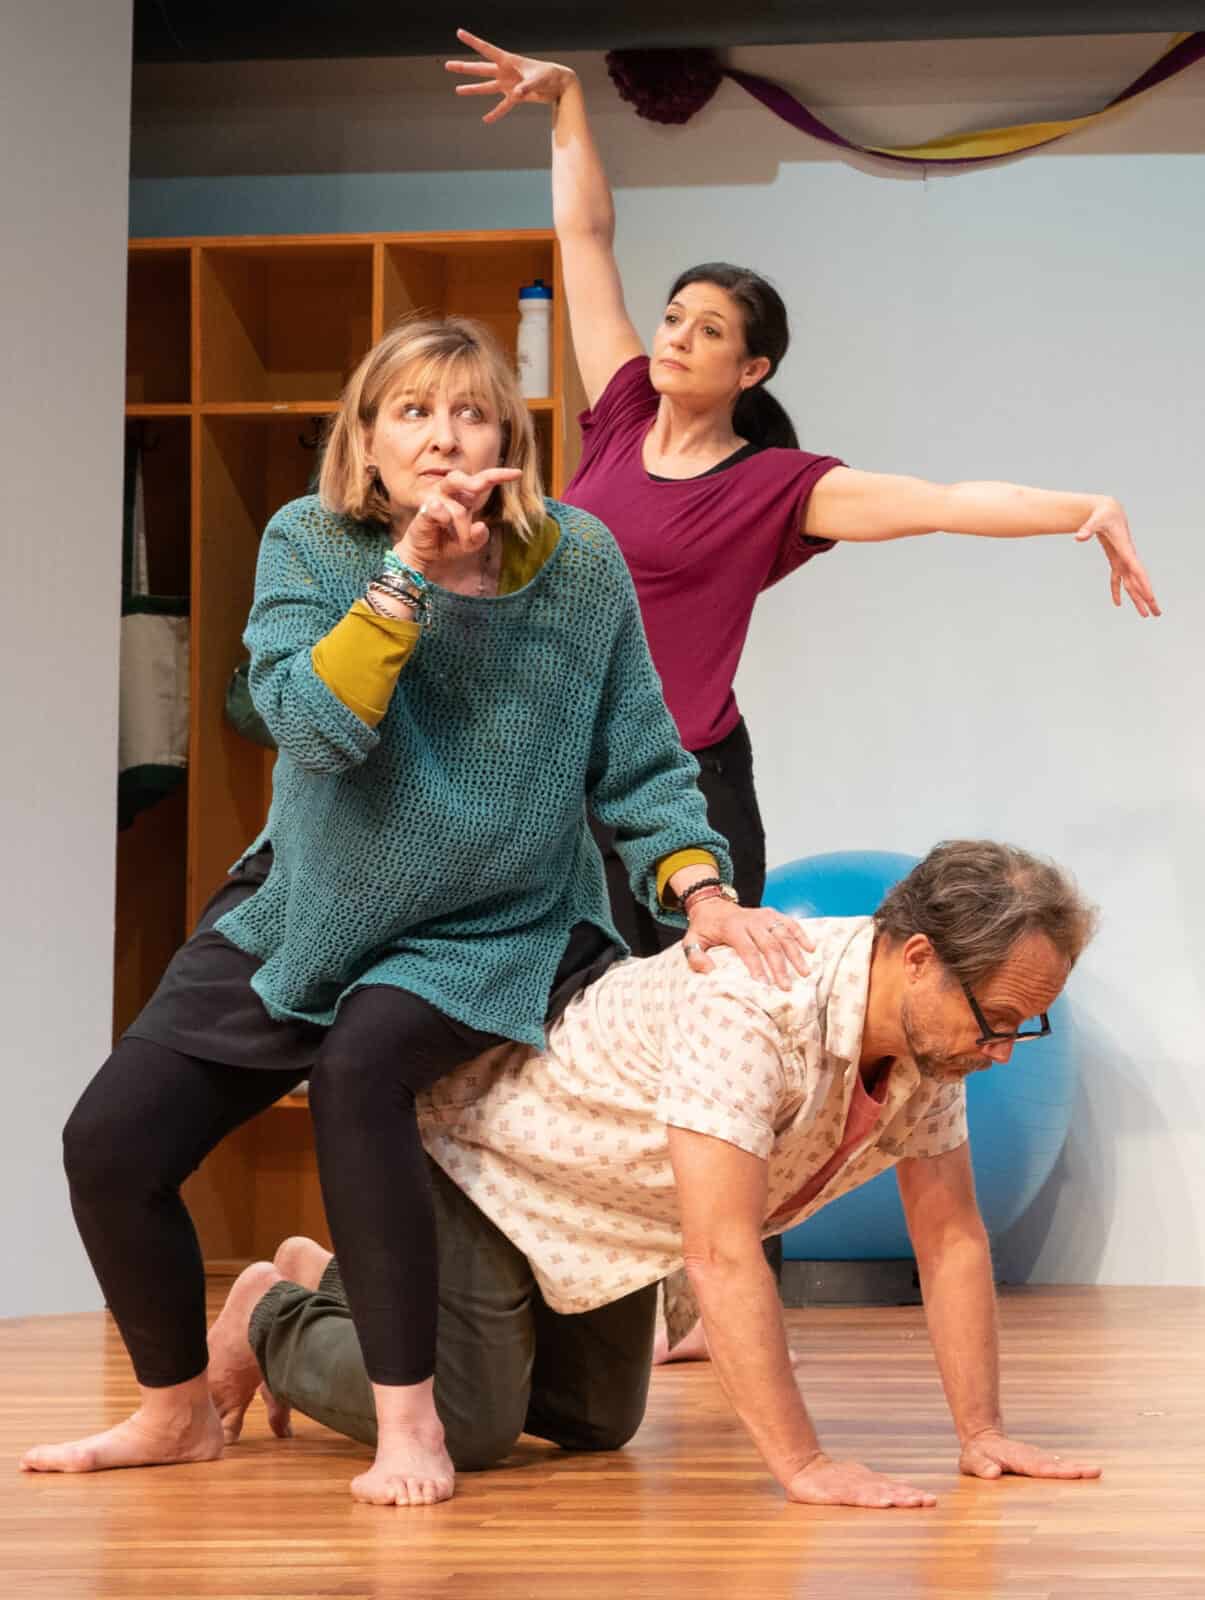 Tara Franklin as Theresa, Corrina May as Marty and Alex Draper as James improvise in a community acting class in Annie Baker's 'Circle mirror transformation.' Press photo courtesy of Chester Theatre.